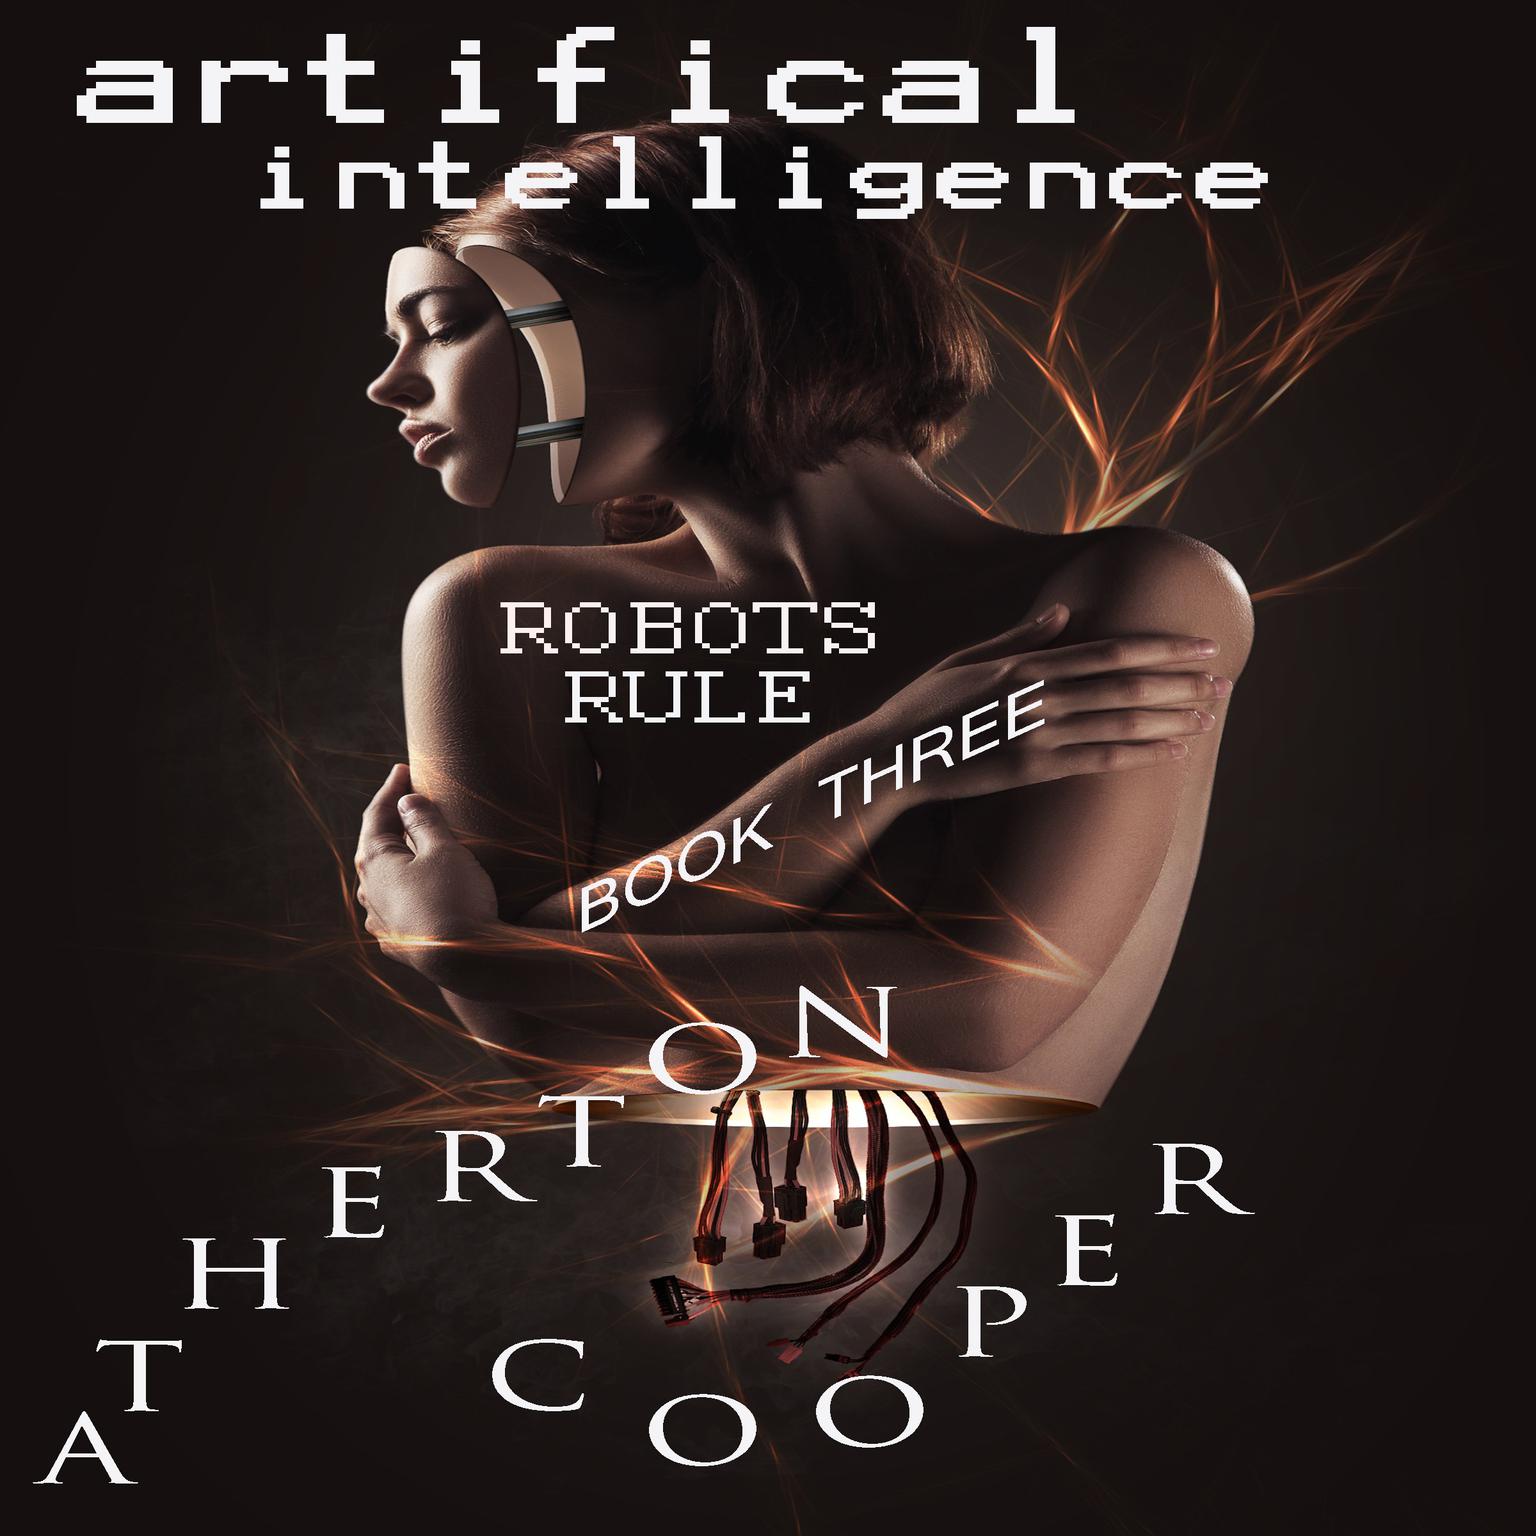 Artifical Intelligence - Robots Rule Book Three Audiobook, by Atherton Cooper